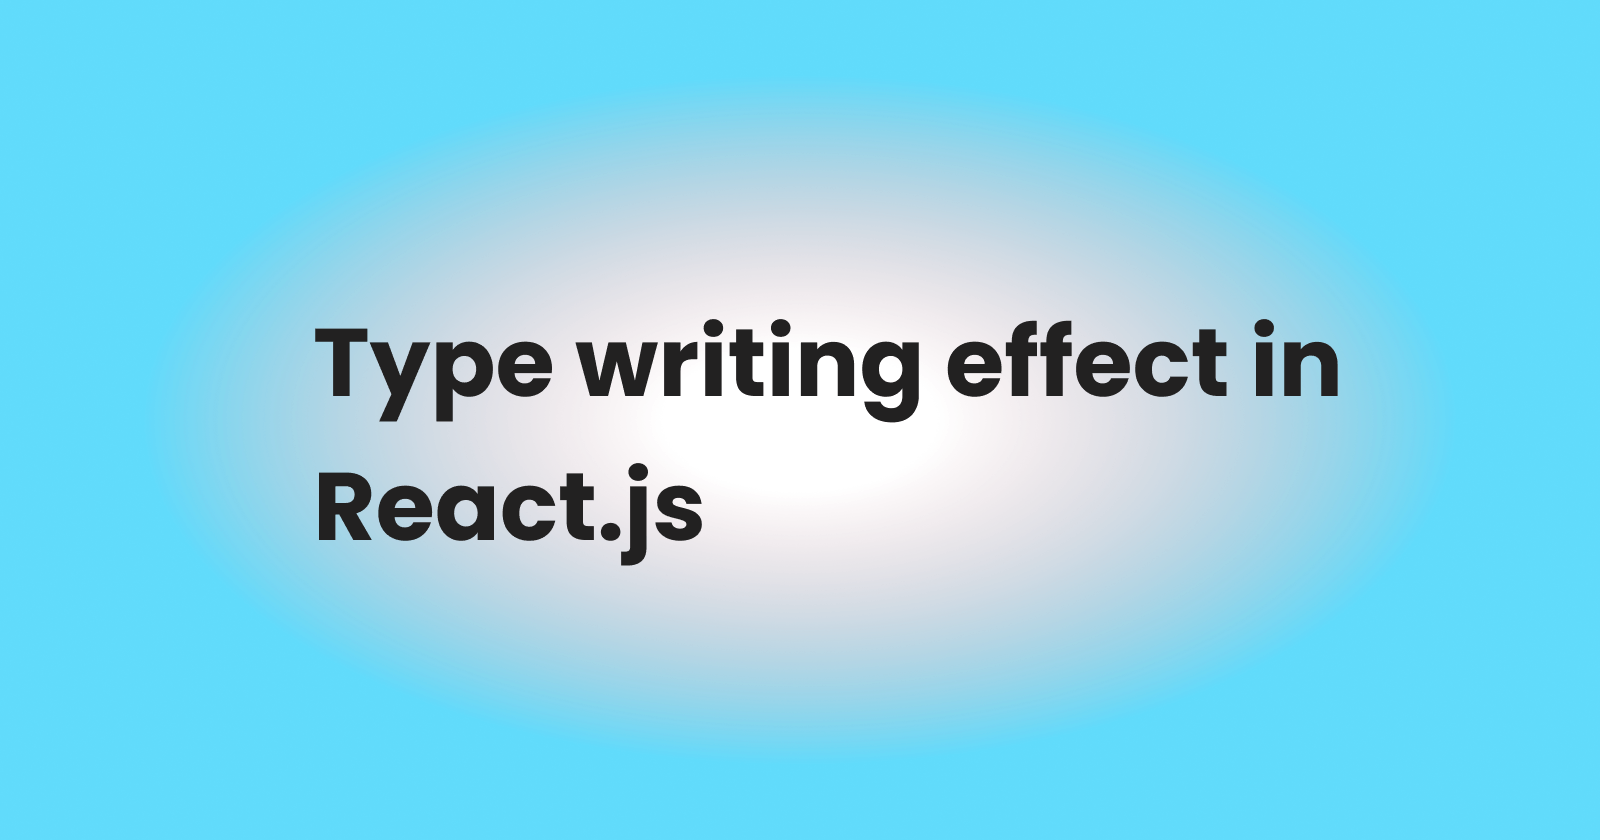 Creating a typewriting-effect in React.js